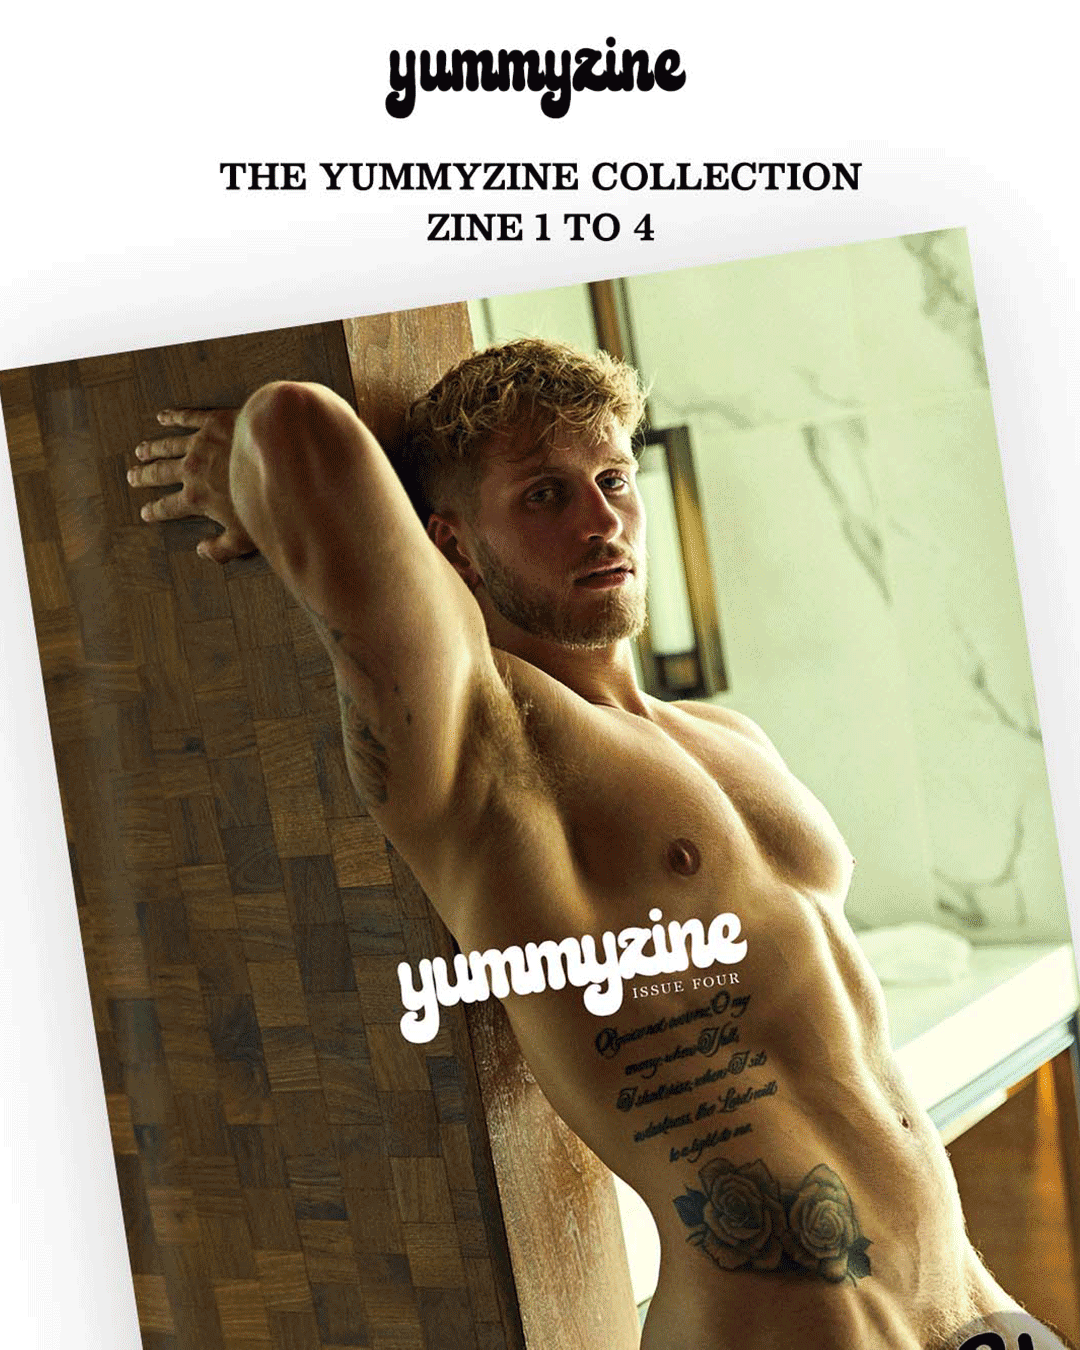 YUMMYZINE COLLECTION: ISSUES ONE, TWO, THREE, & FOUR (7958570696954)